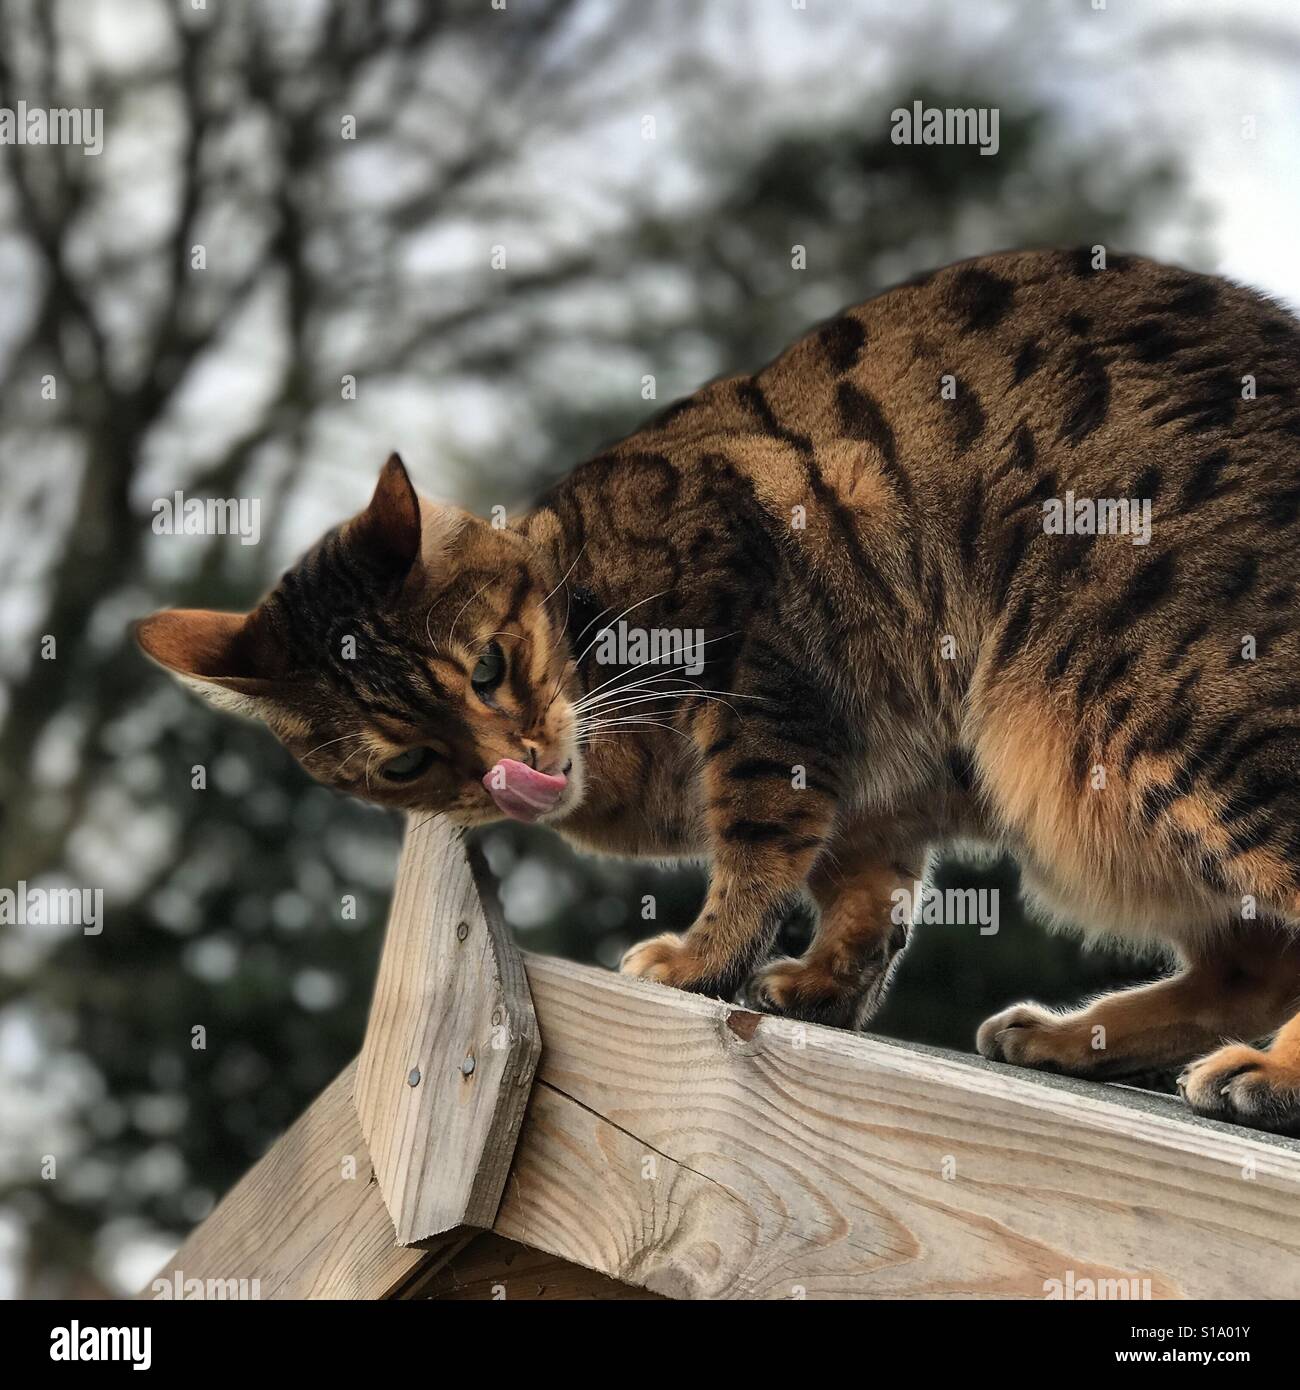 A pedigree Bengal cat with its tongue out. Stock Photo